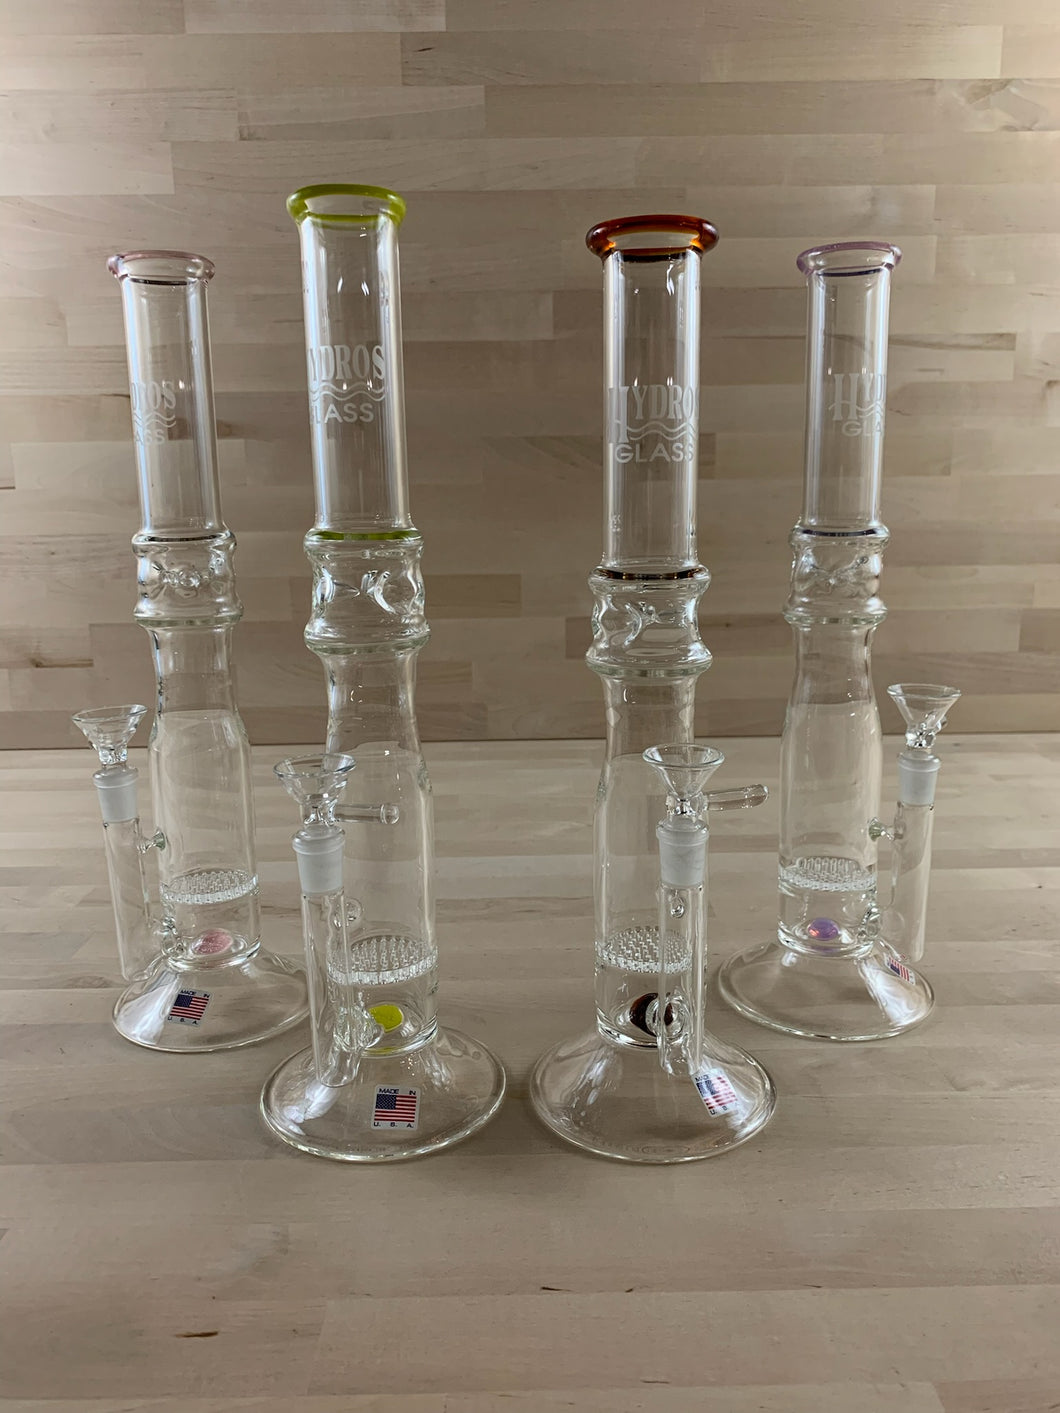 Hydros - Single Honeycomb (Multiple Colors Available)